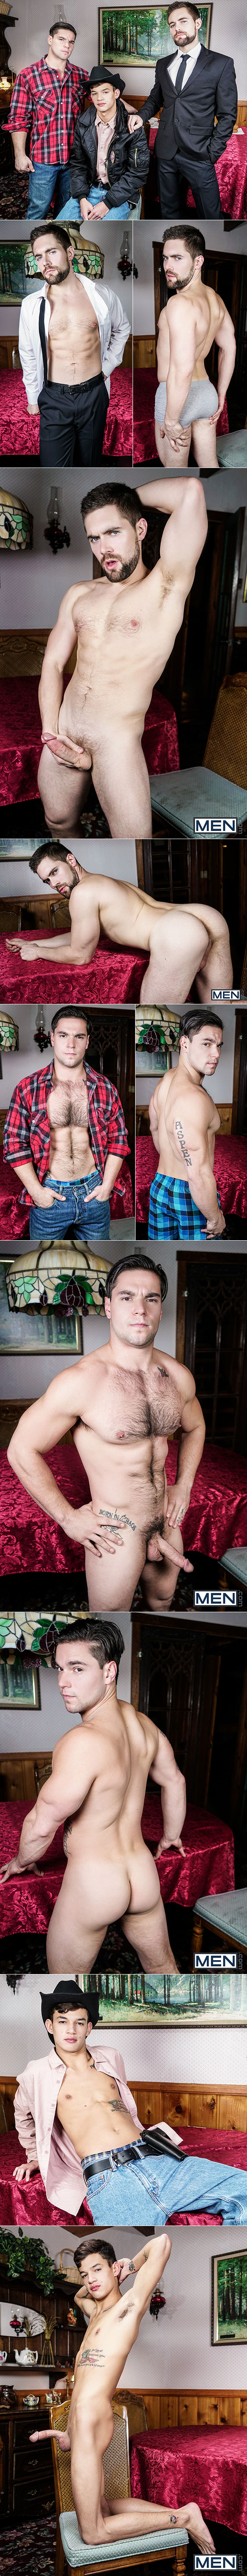 Men.com: Griffin Barrows, Xander Brave and Aspen's threeway in "Twink Peaks, Part 3"